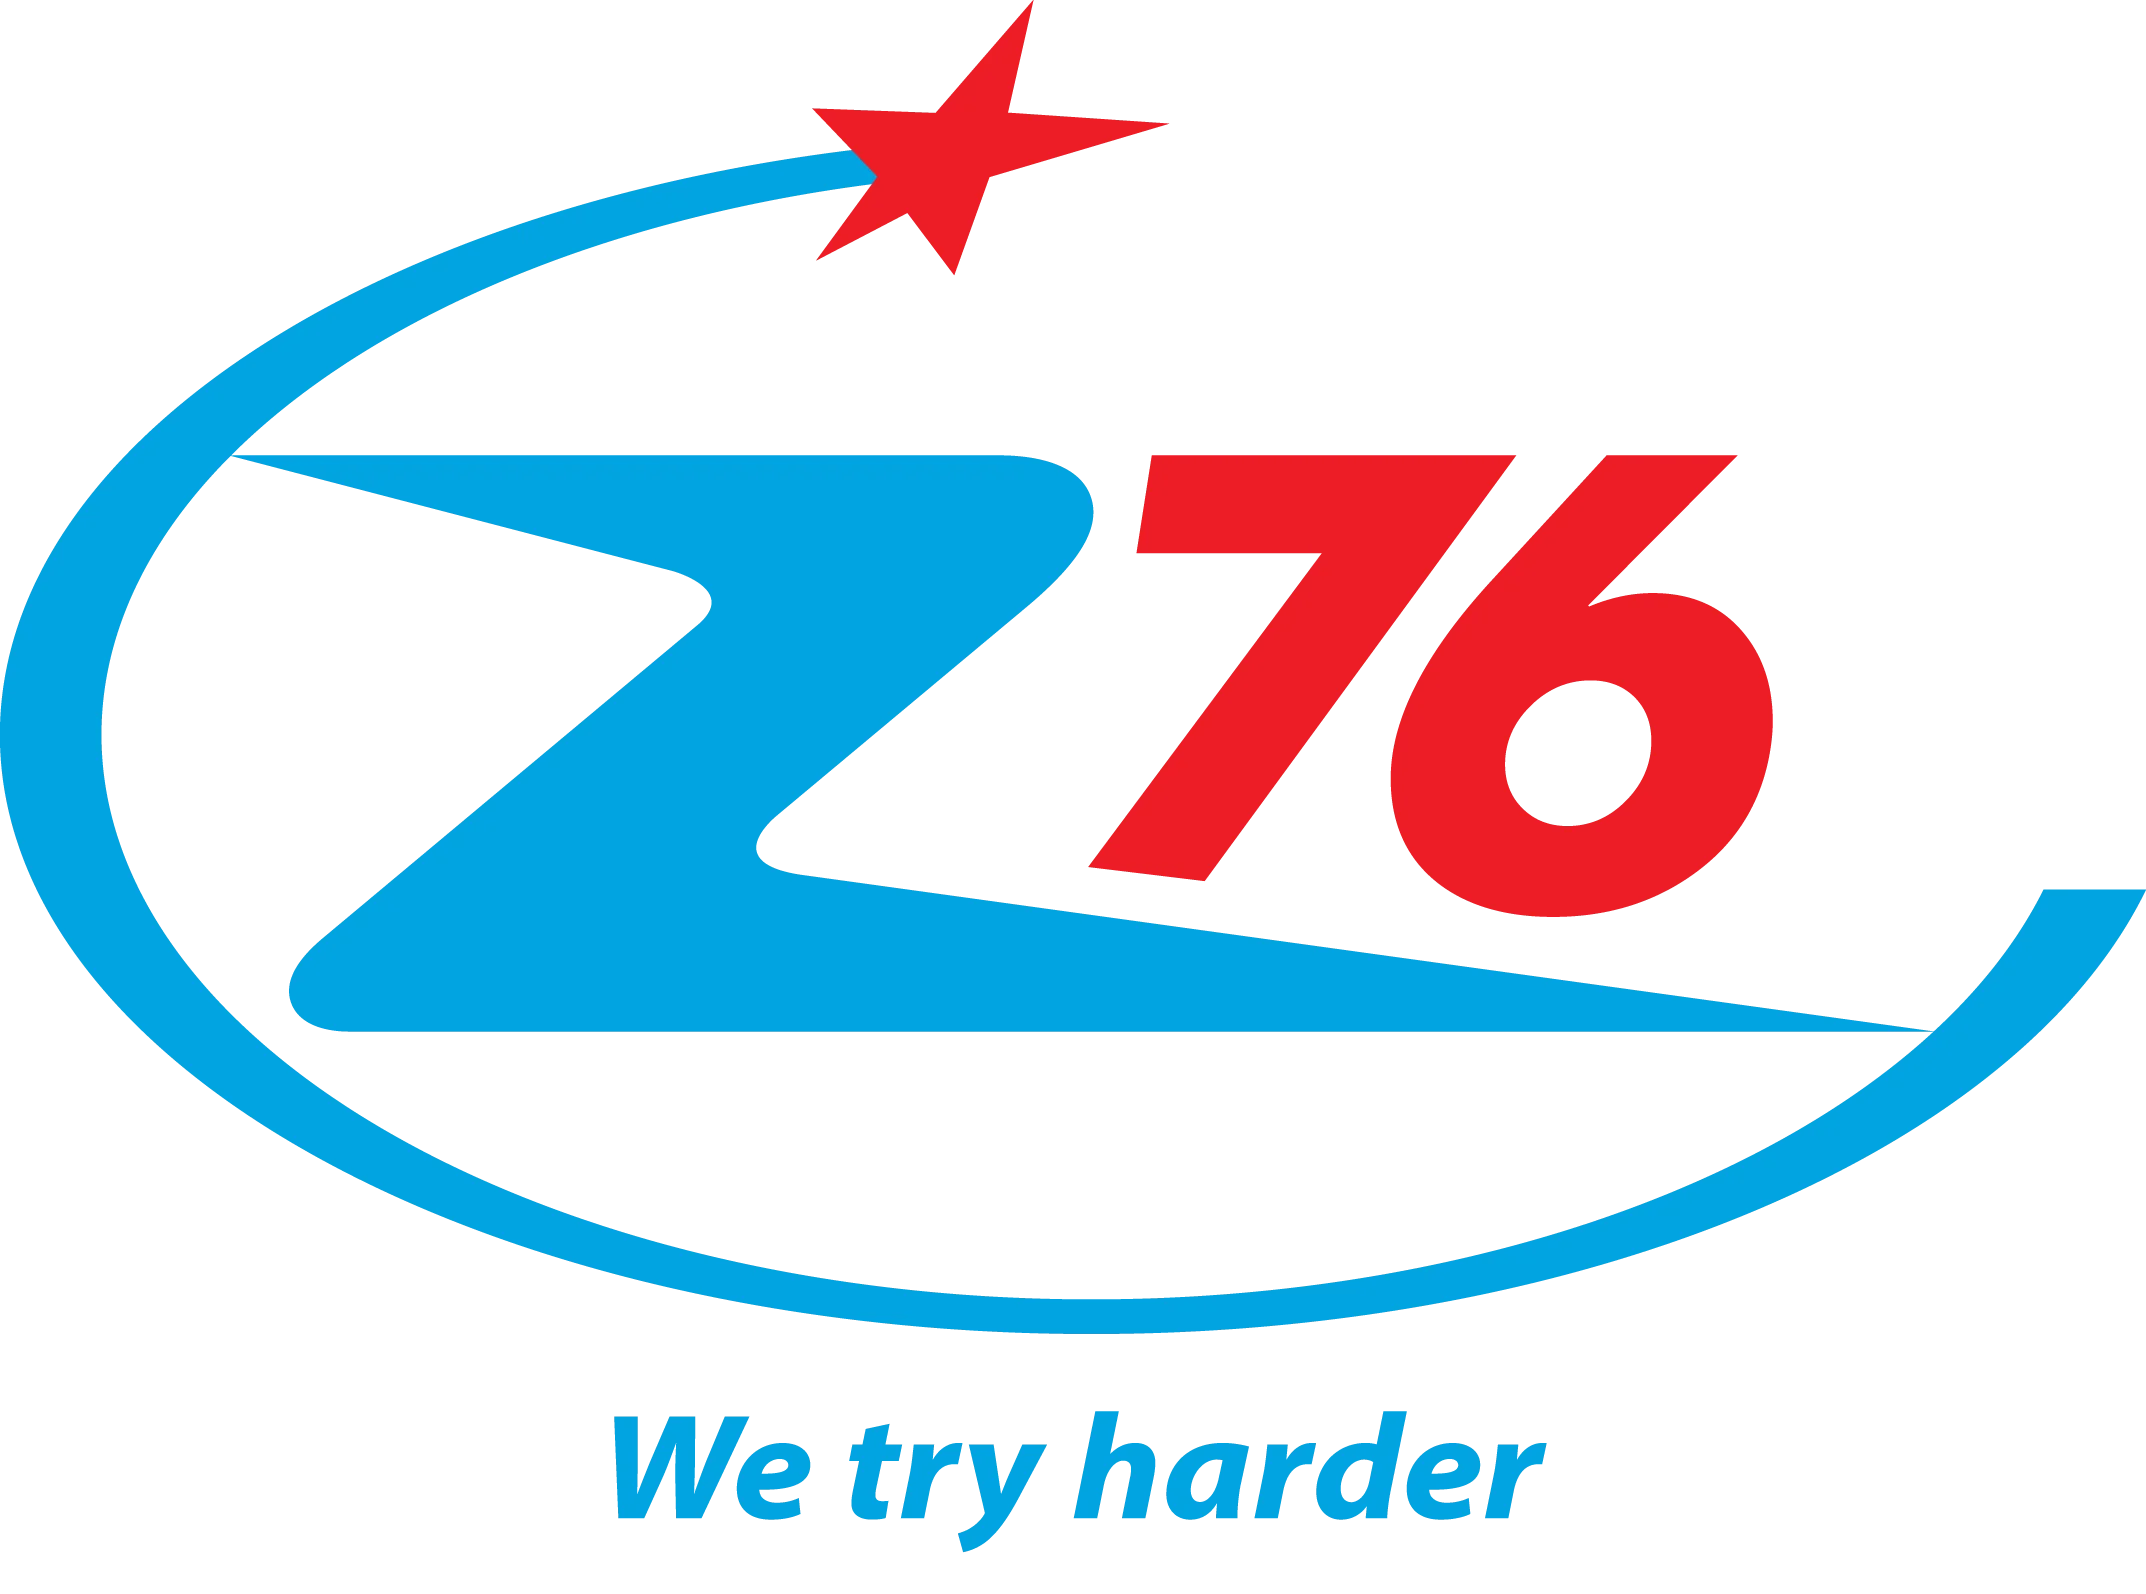 New Heroes Of 76 Logo - National Sojourners | Heroes of '76